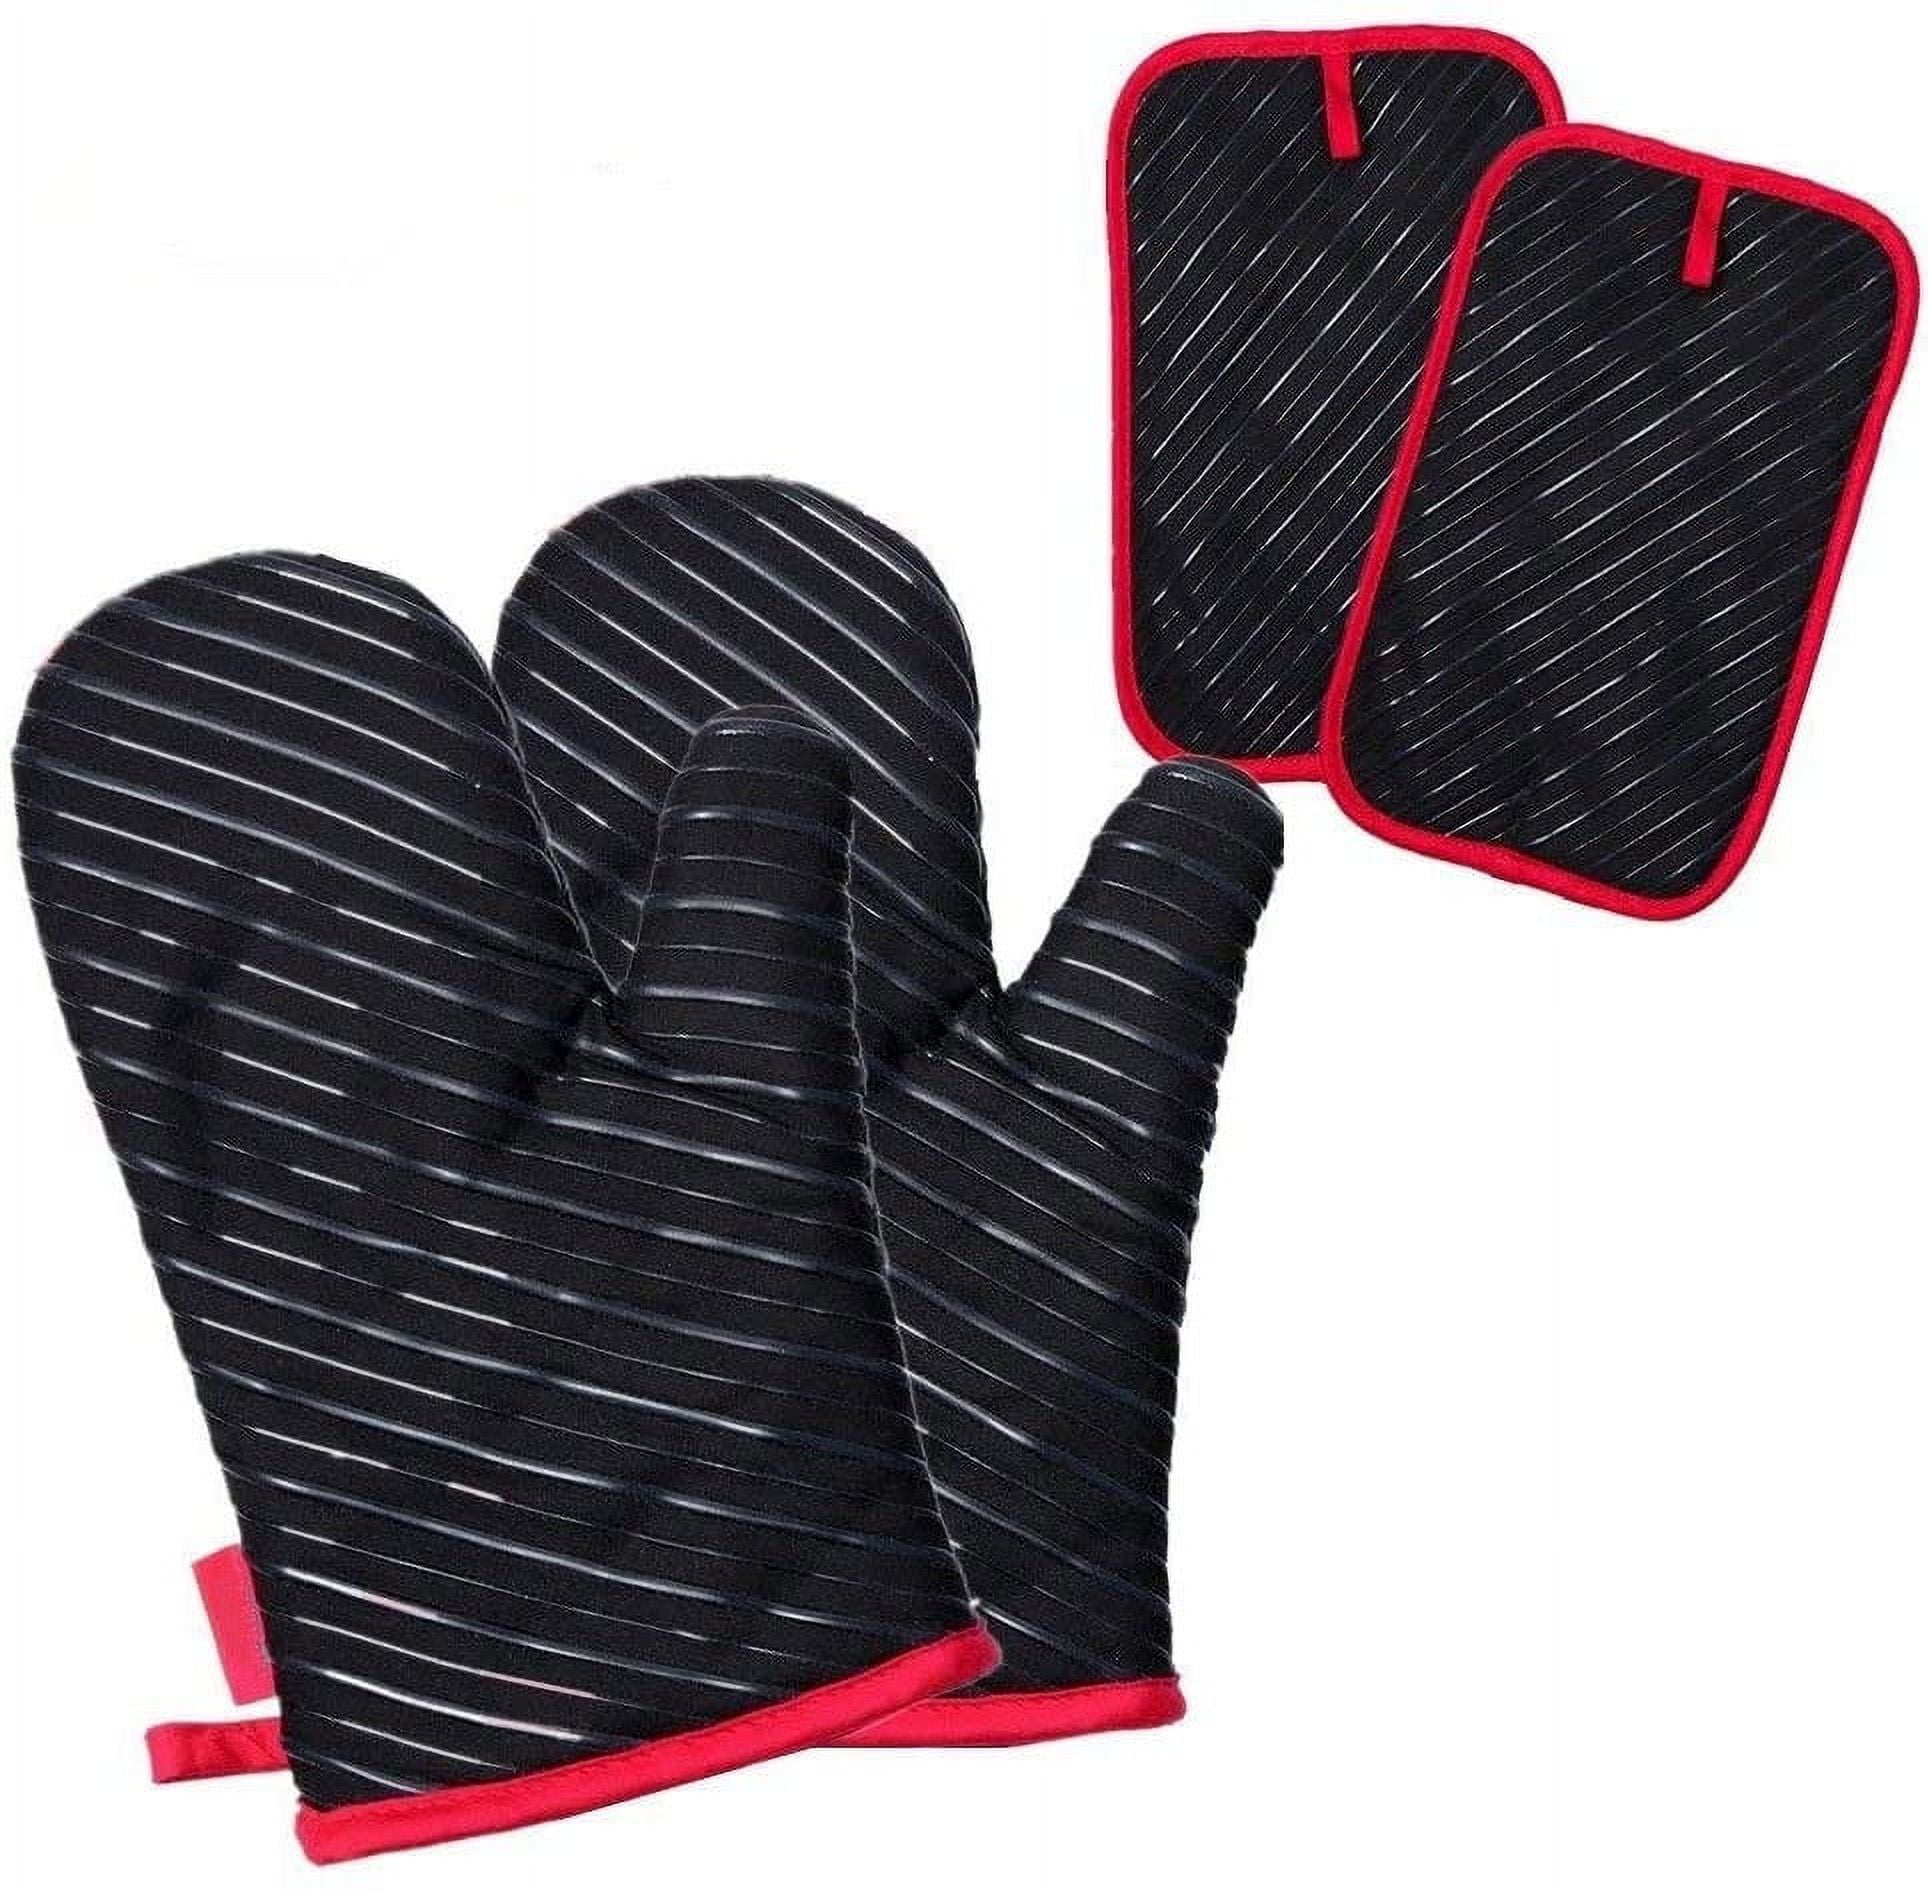 Checkered Oven Mitts And Pot Holder, Heat Resistant Gloves And Heat  Insulation Pad, Non-slip Bpa-free Oven Mitts For Bbq, Baking, Cooking, Hot  Pads For Hot Dishes Or Pans, Home Kitchen Supplies 